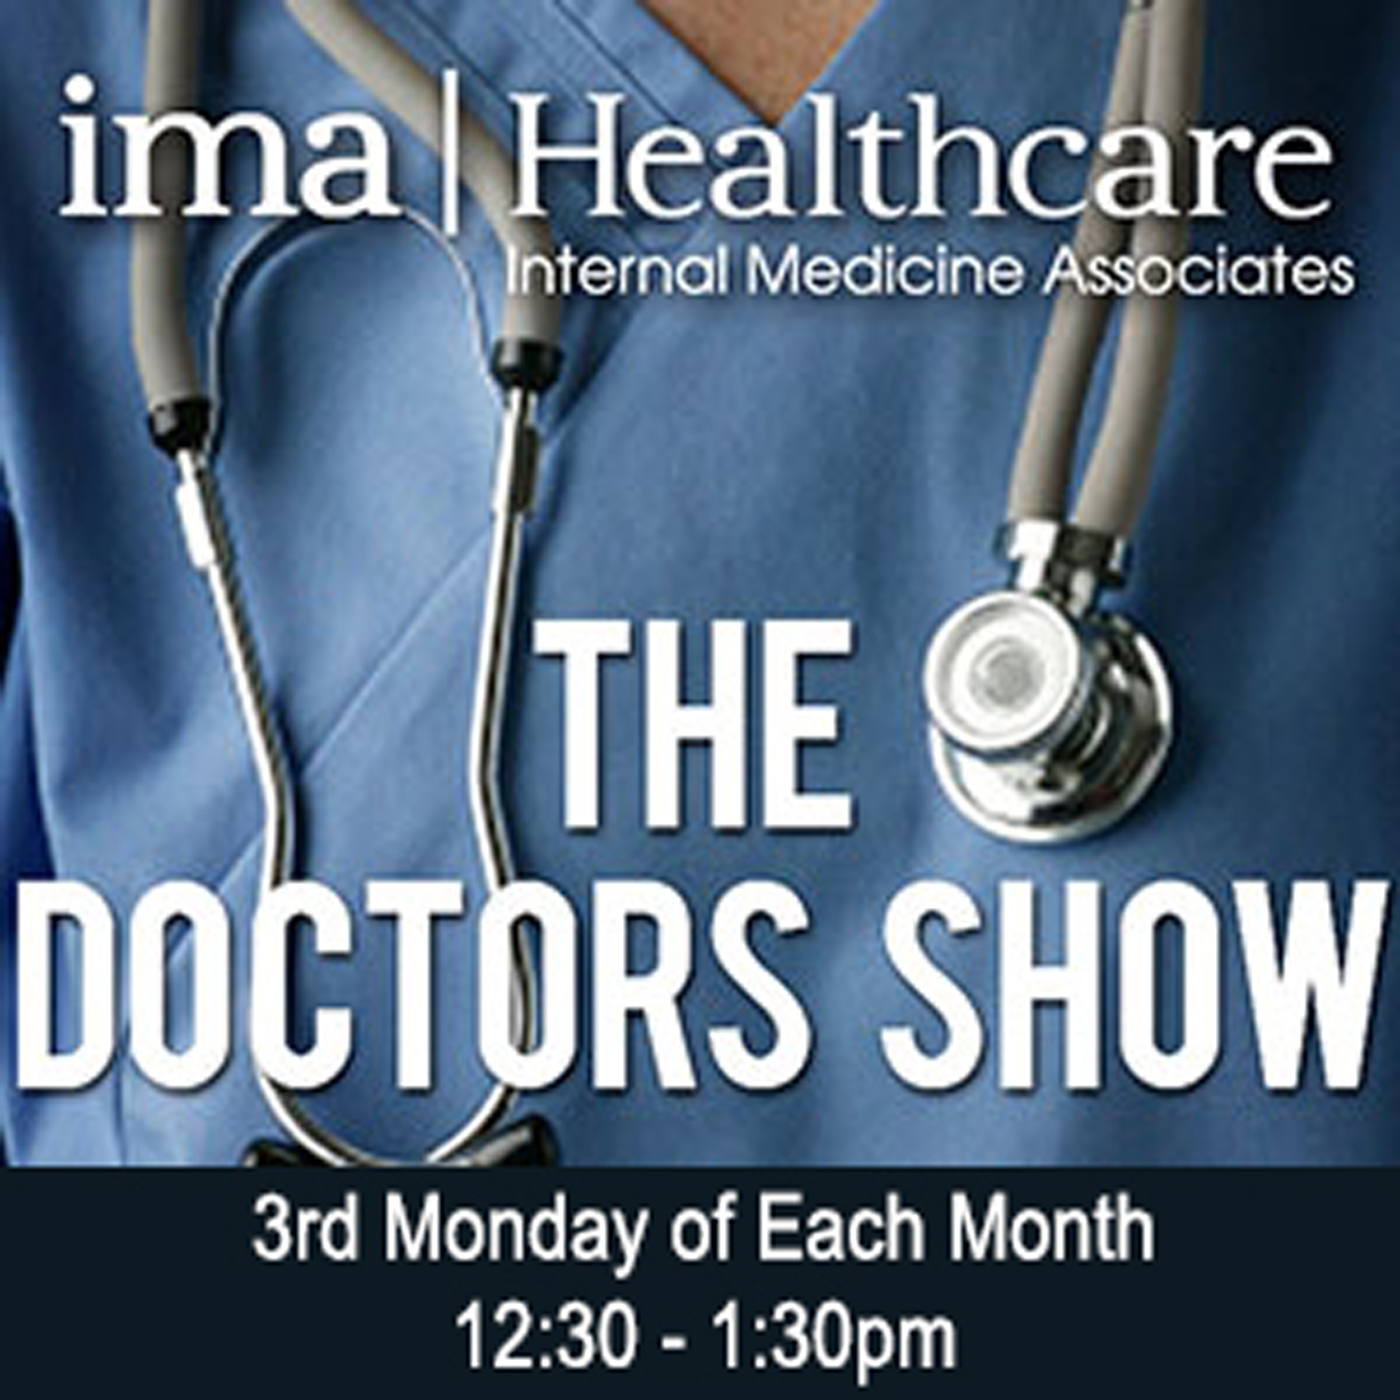 The IMA Doctors Show featuring Dr. Brent Hella and Clinical Dietician Amanda Nac